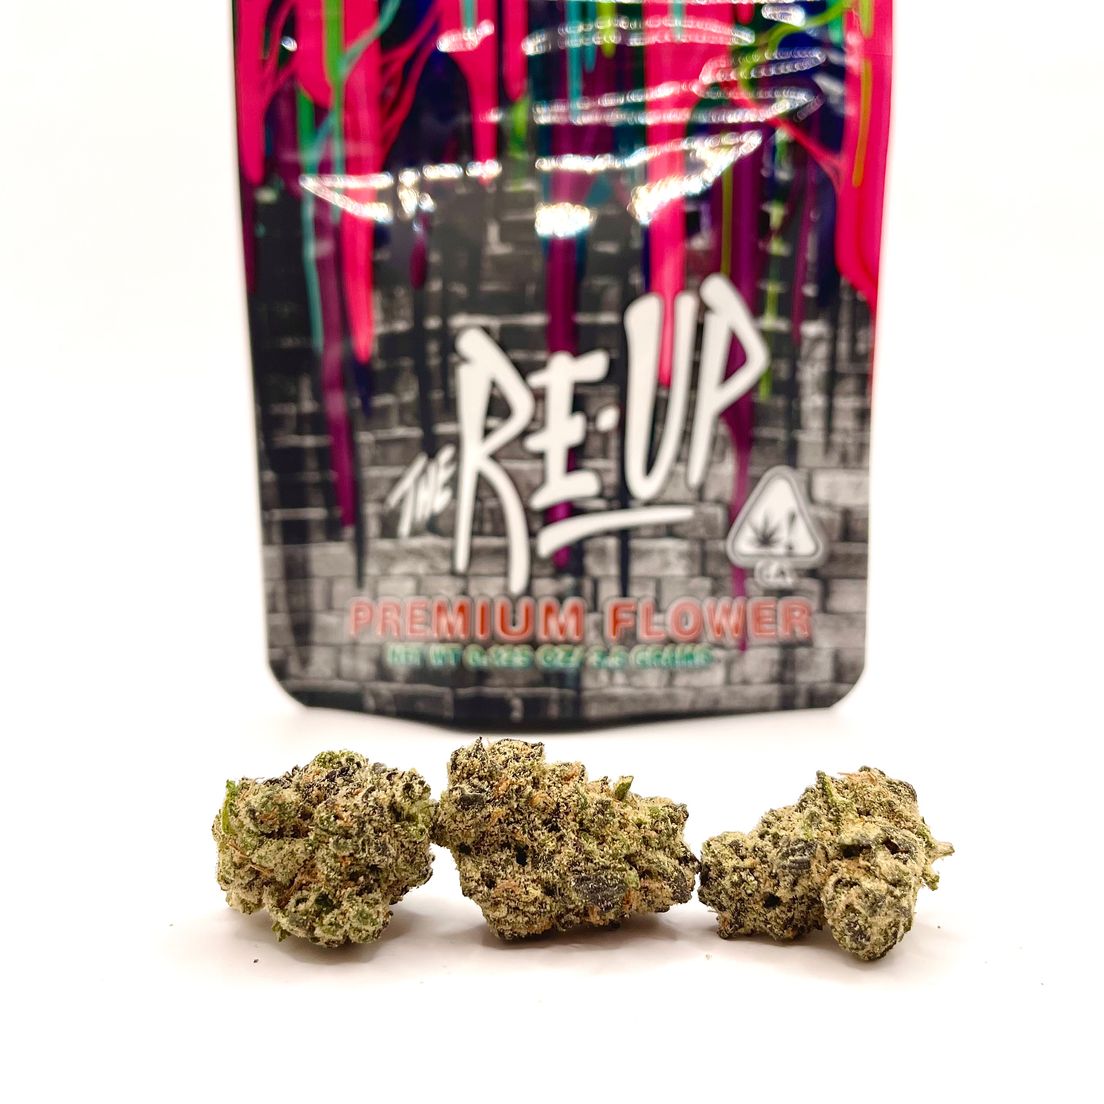 PRE-ORDER ONLY 1/8 Grape Gas (Indoor/35.33%/Hybrid - Indica Dom.) - The Re-Up